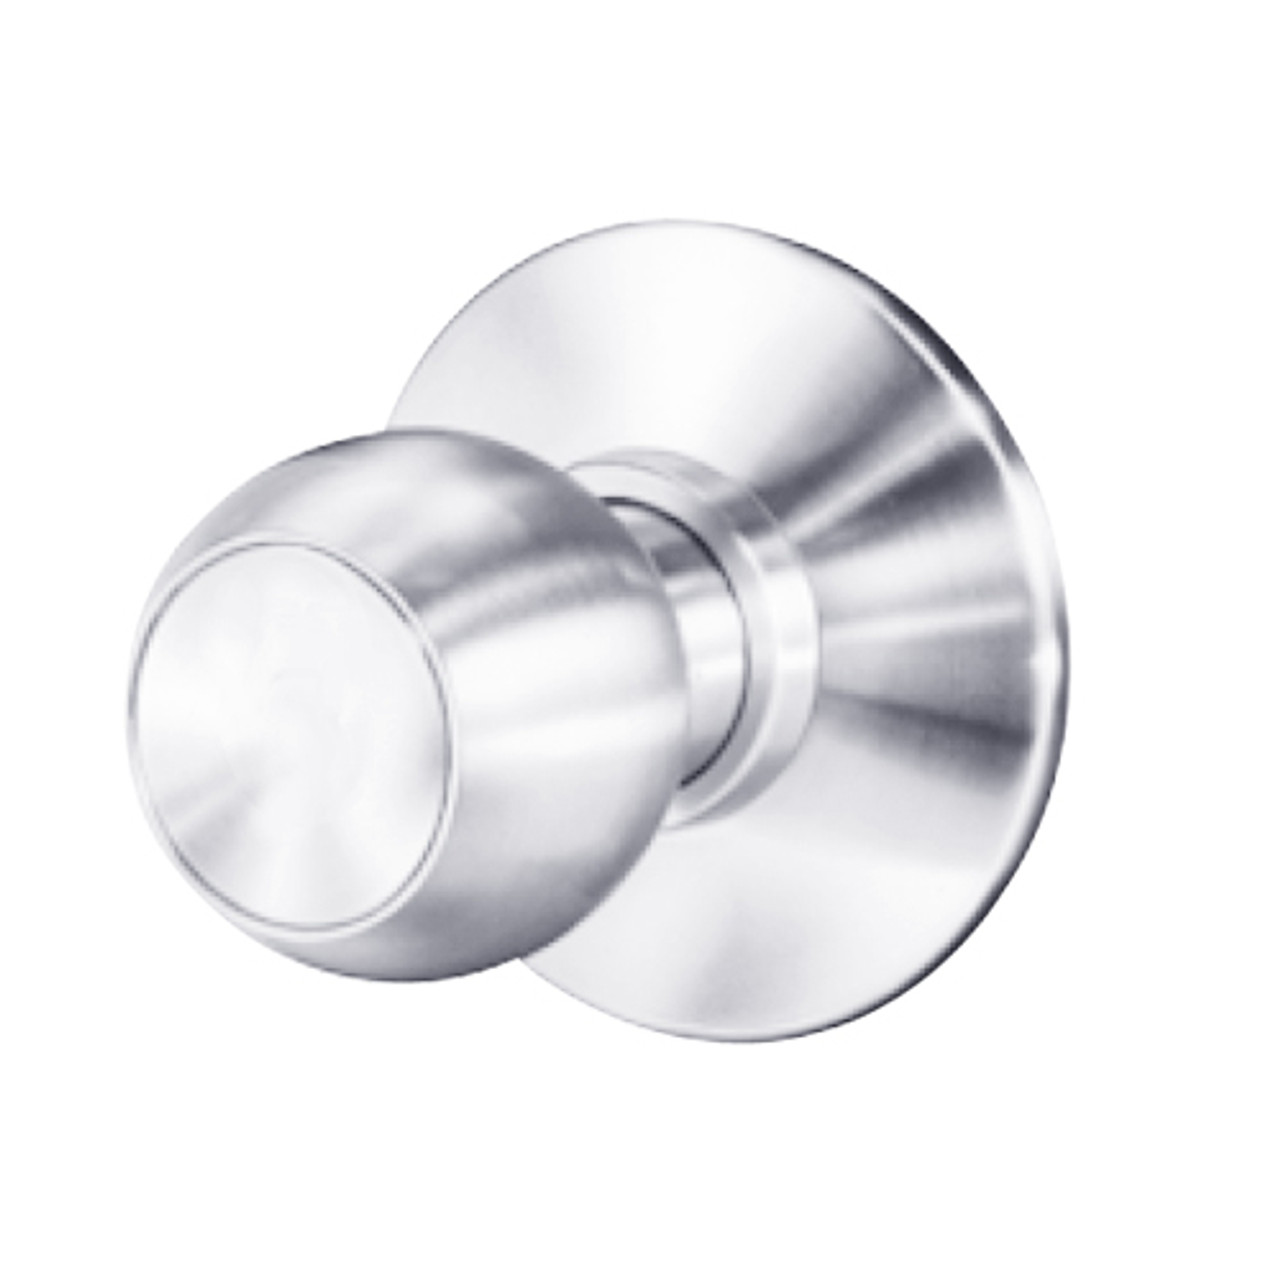 8K30Q4DSTK625 Best 8K Series Exit Heavy Duty Cylindrical Knob Locks with Round Style in Bright Chrome